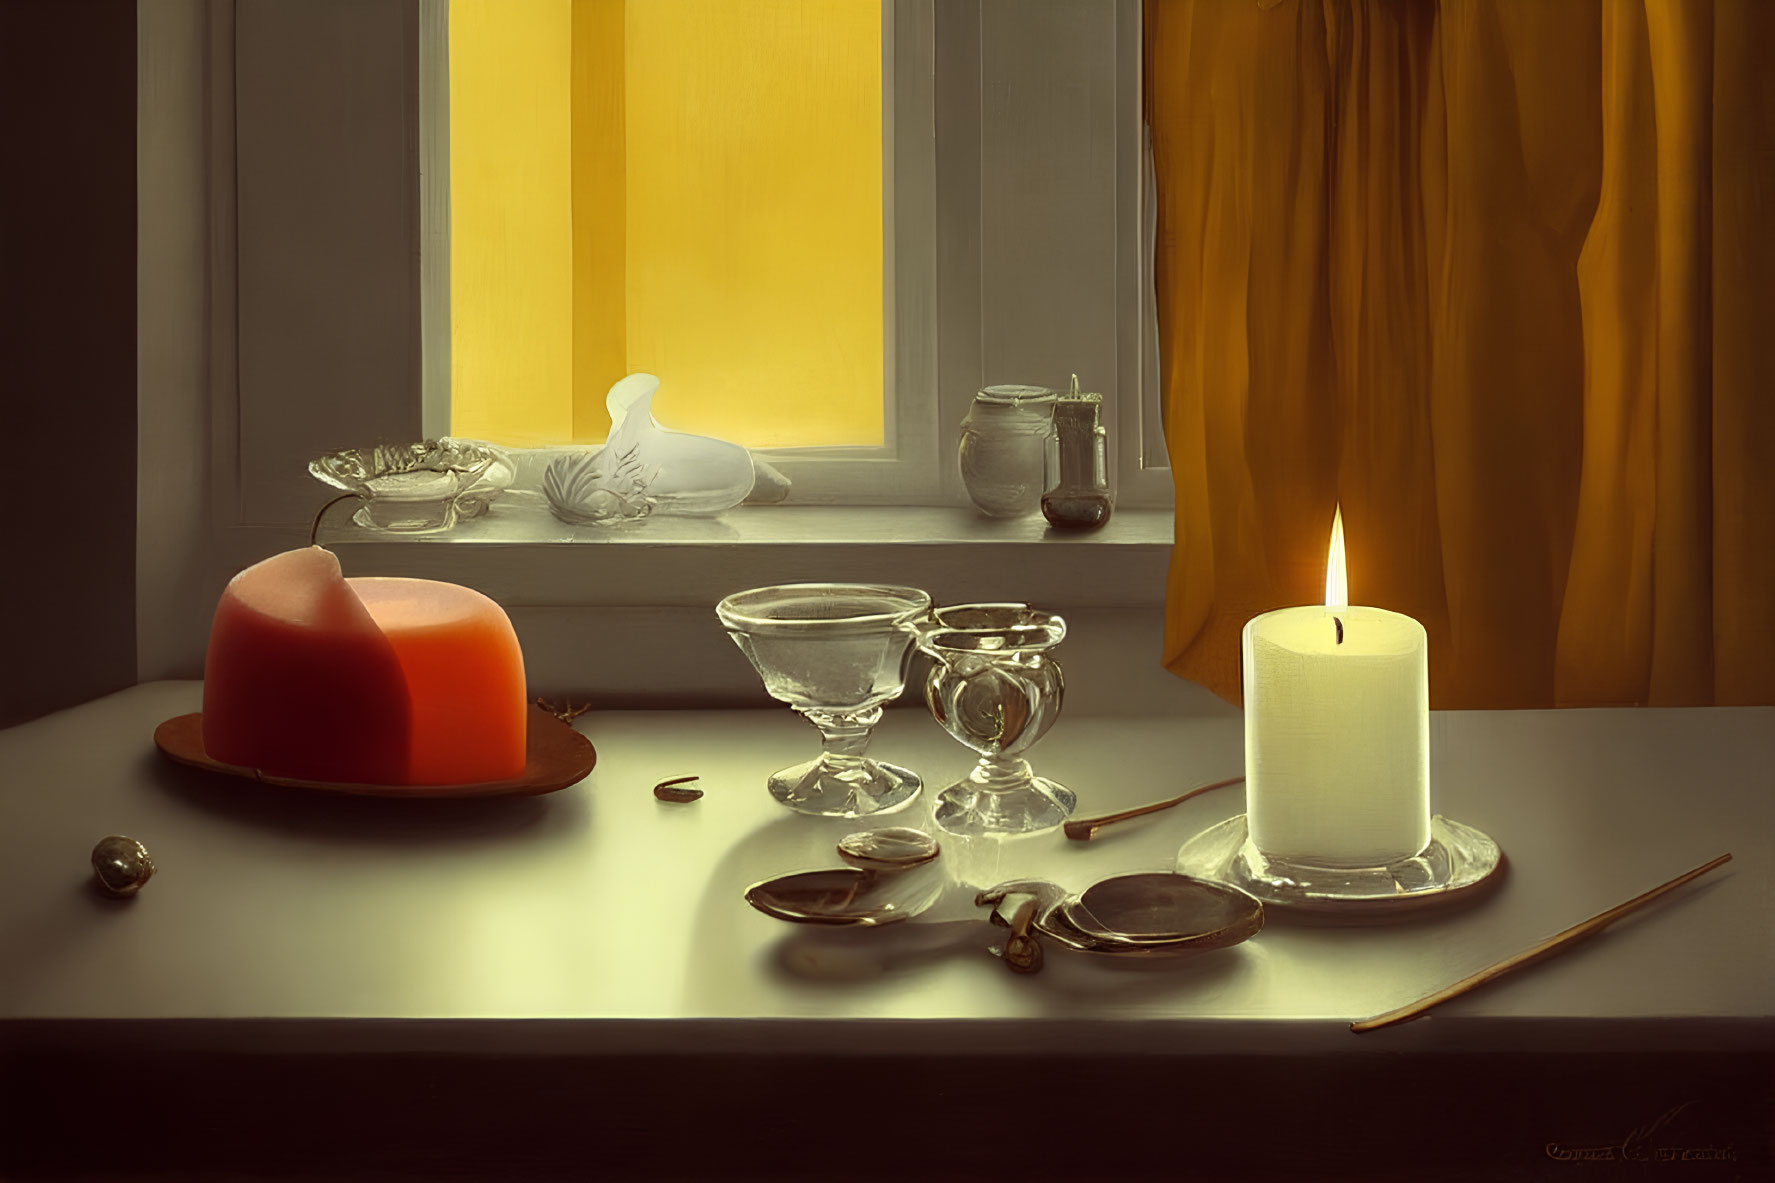 Tranquil still life with candle, spectacles, feather, fruit bowl, and glassware near